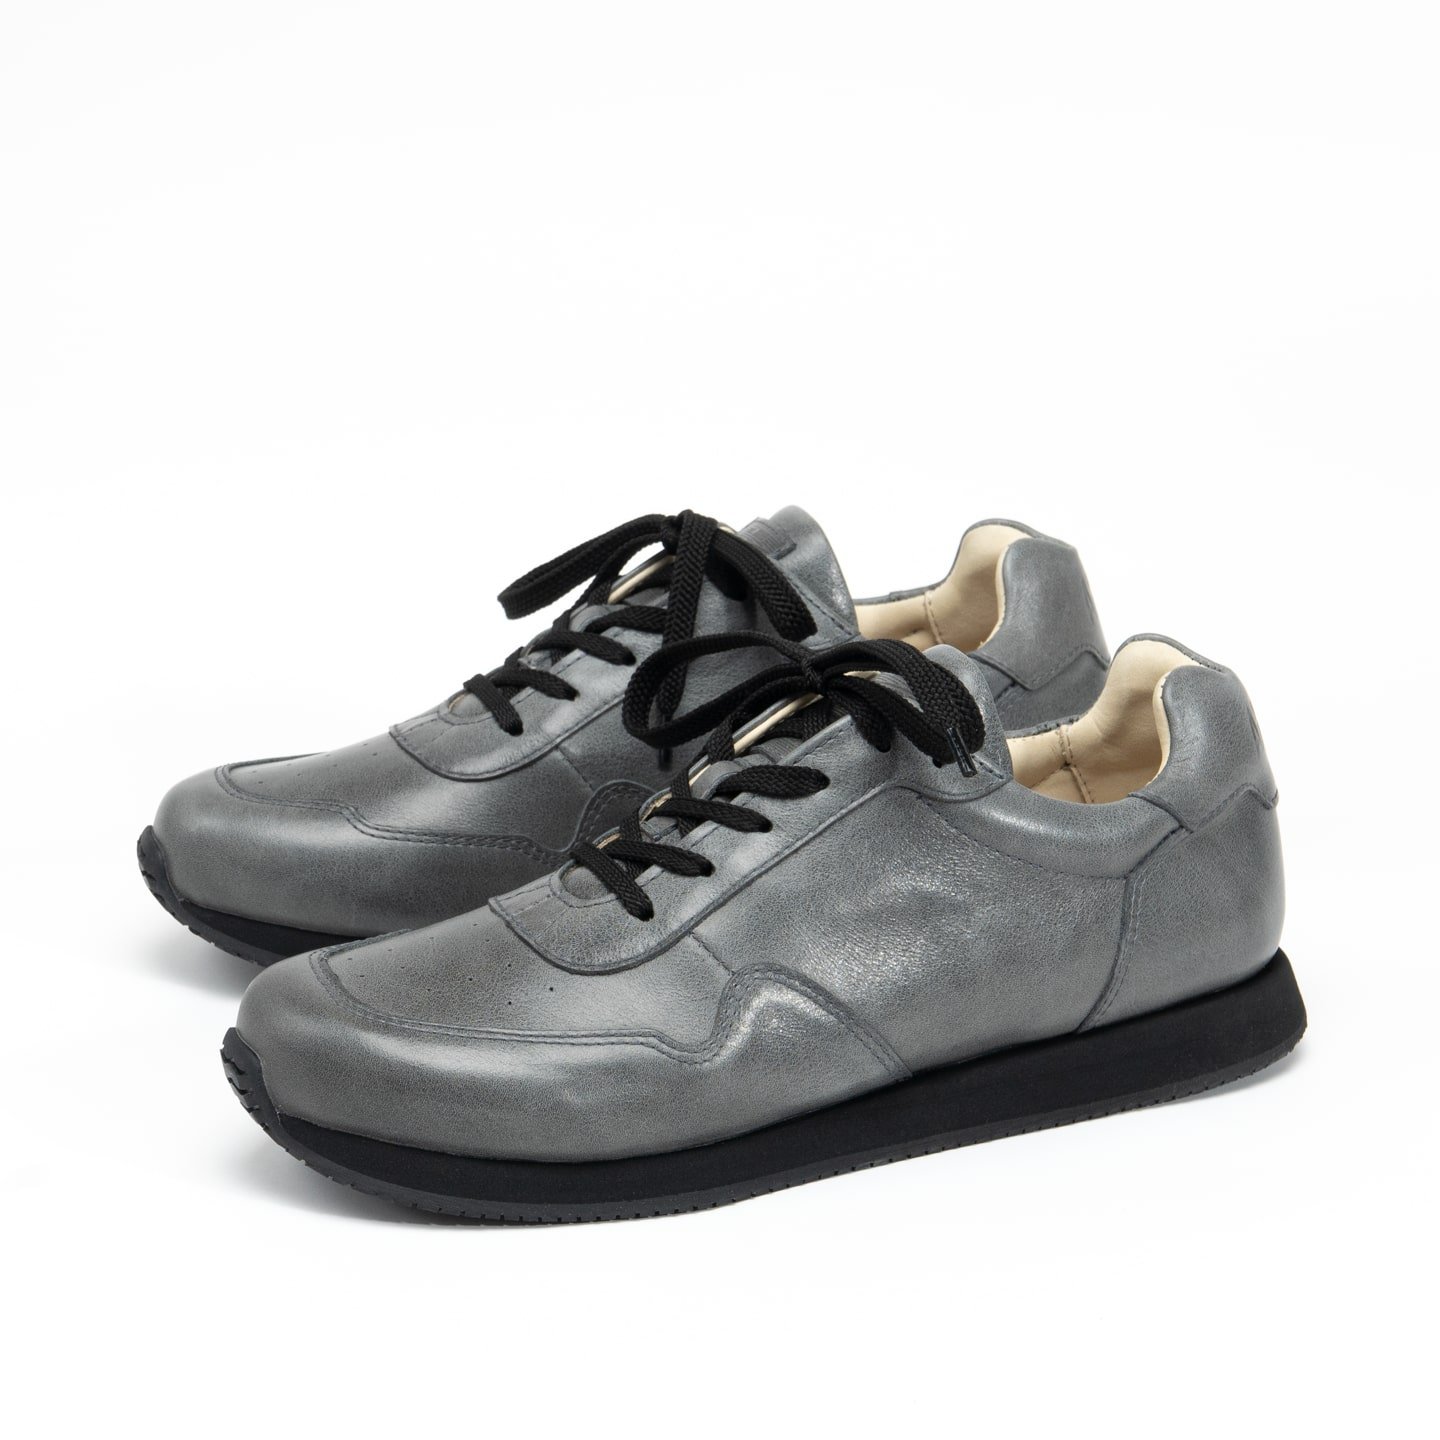 AFOUR leather sneaker handmade in RUSSIA